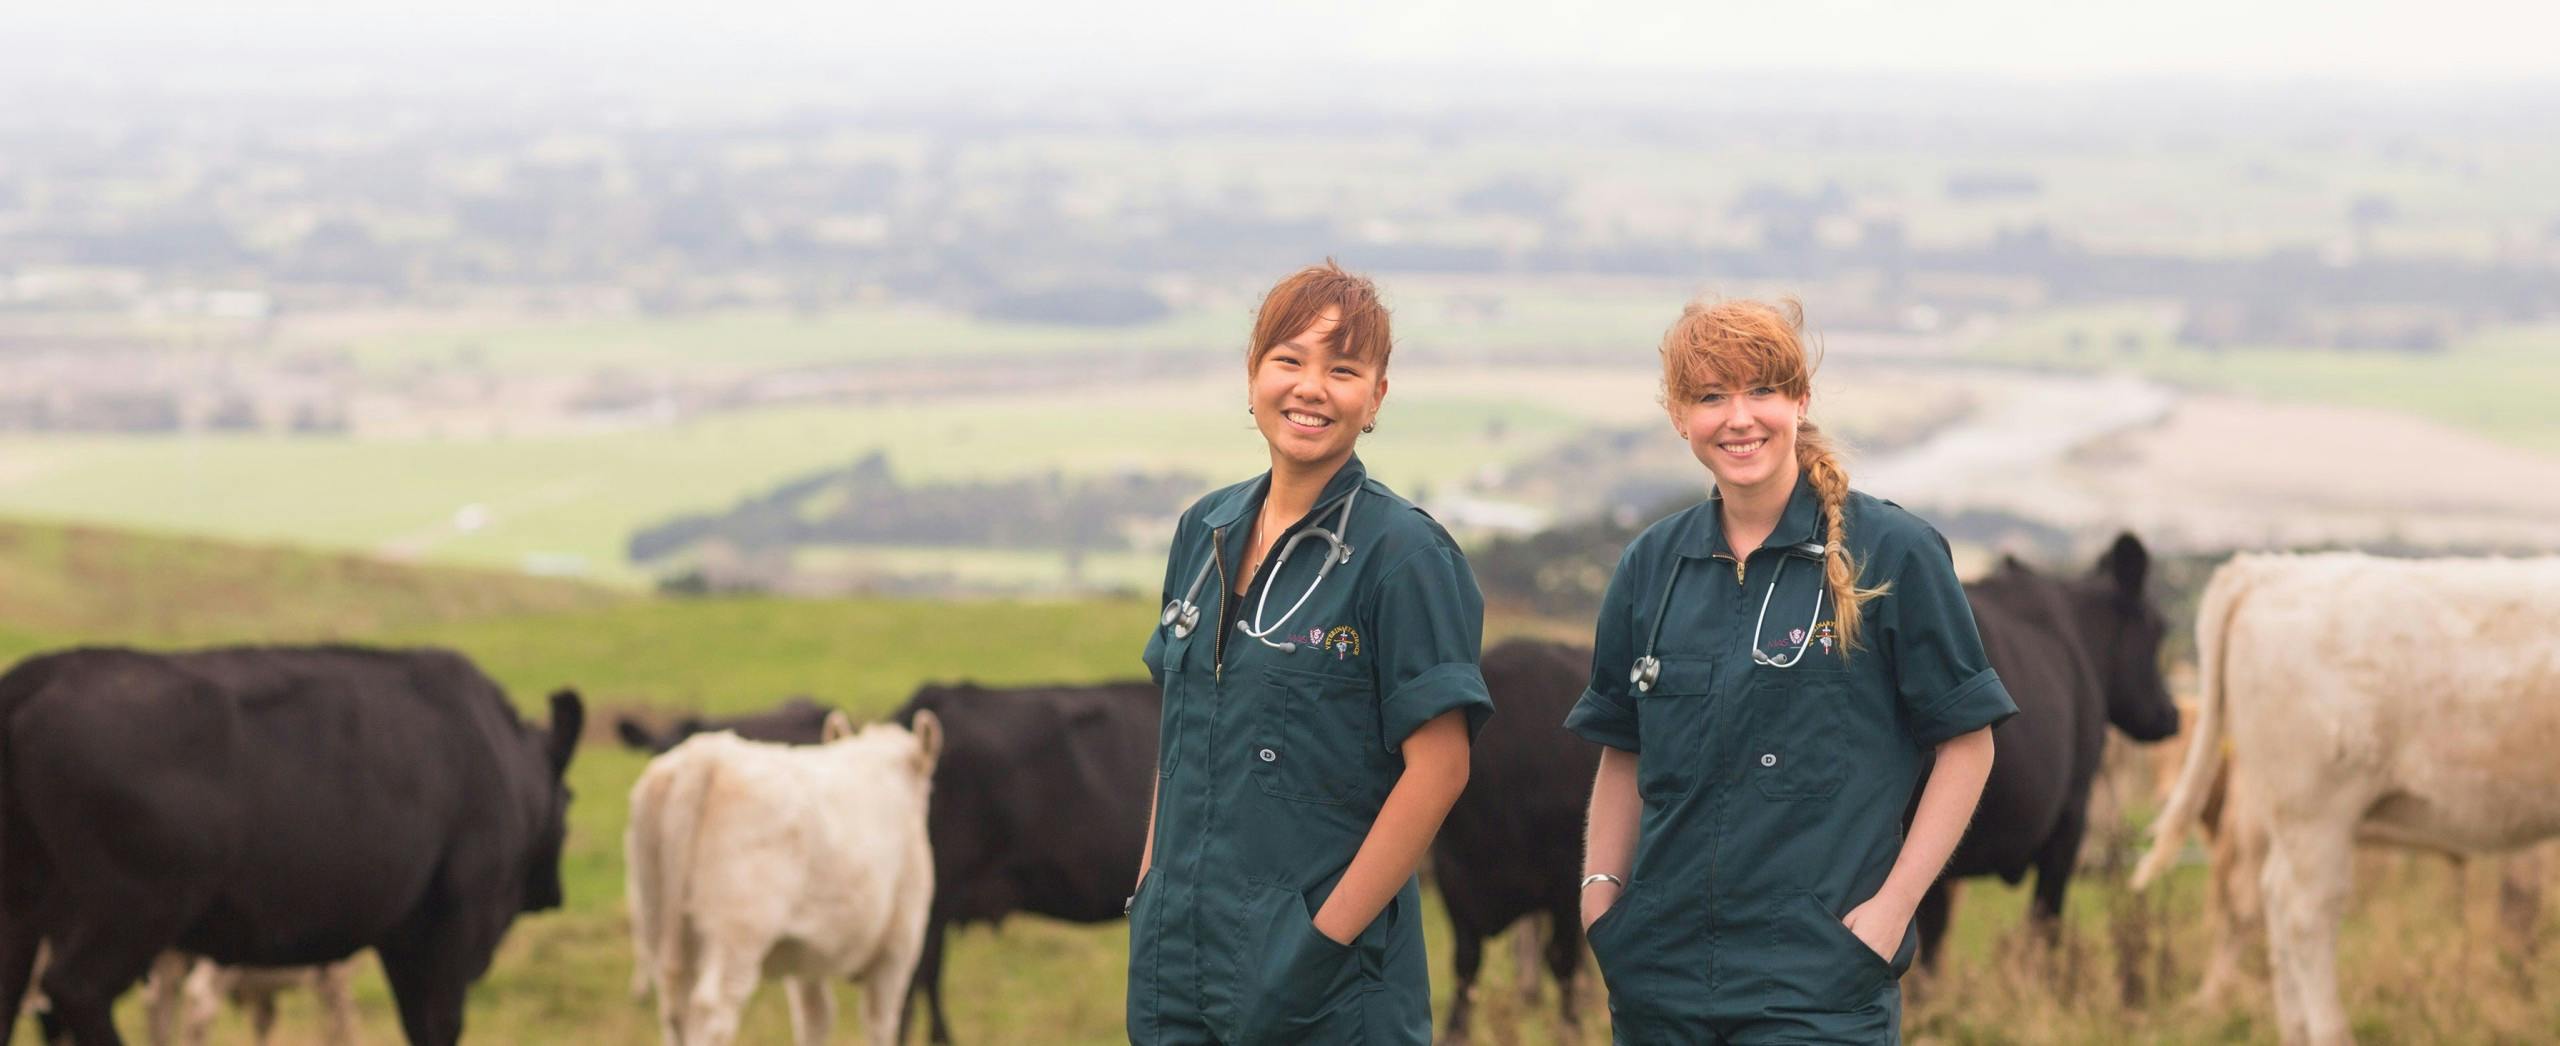 Two female veterinary student on a dairy farm.